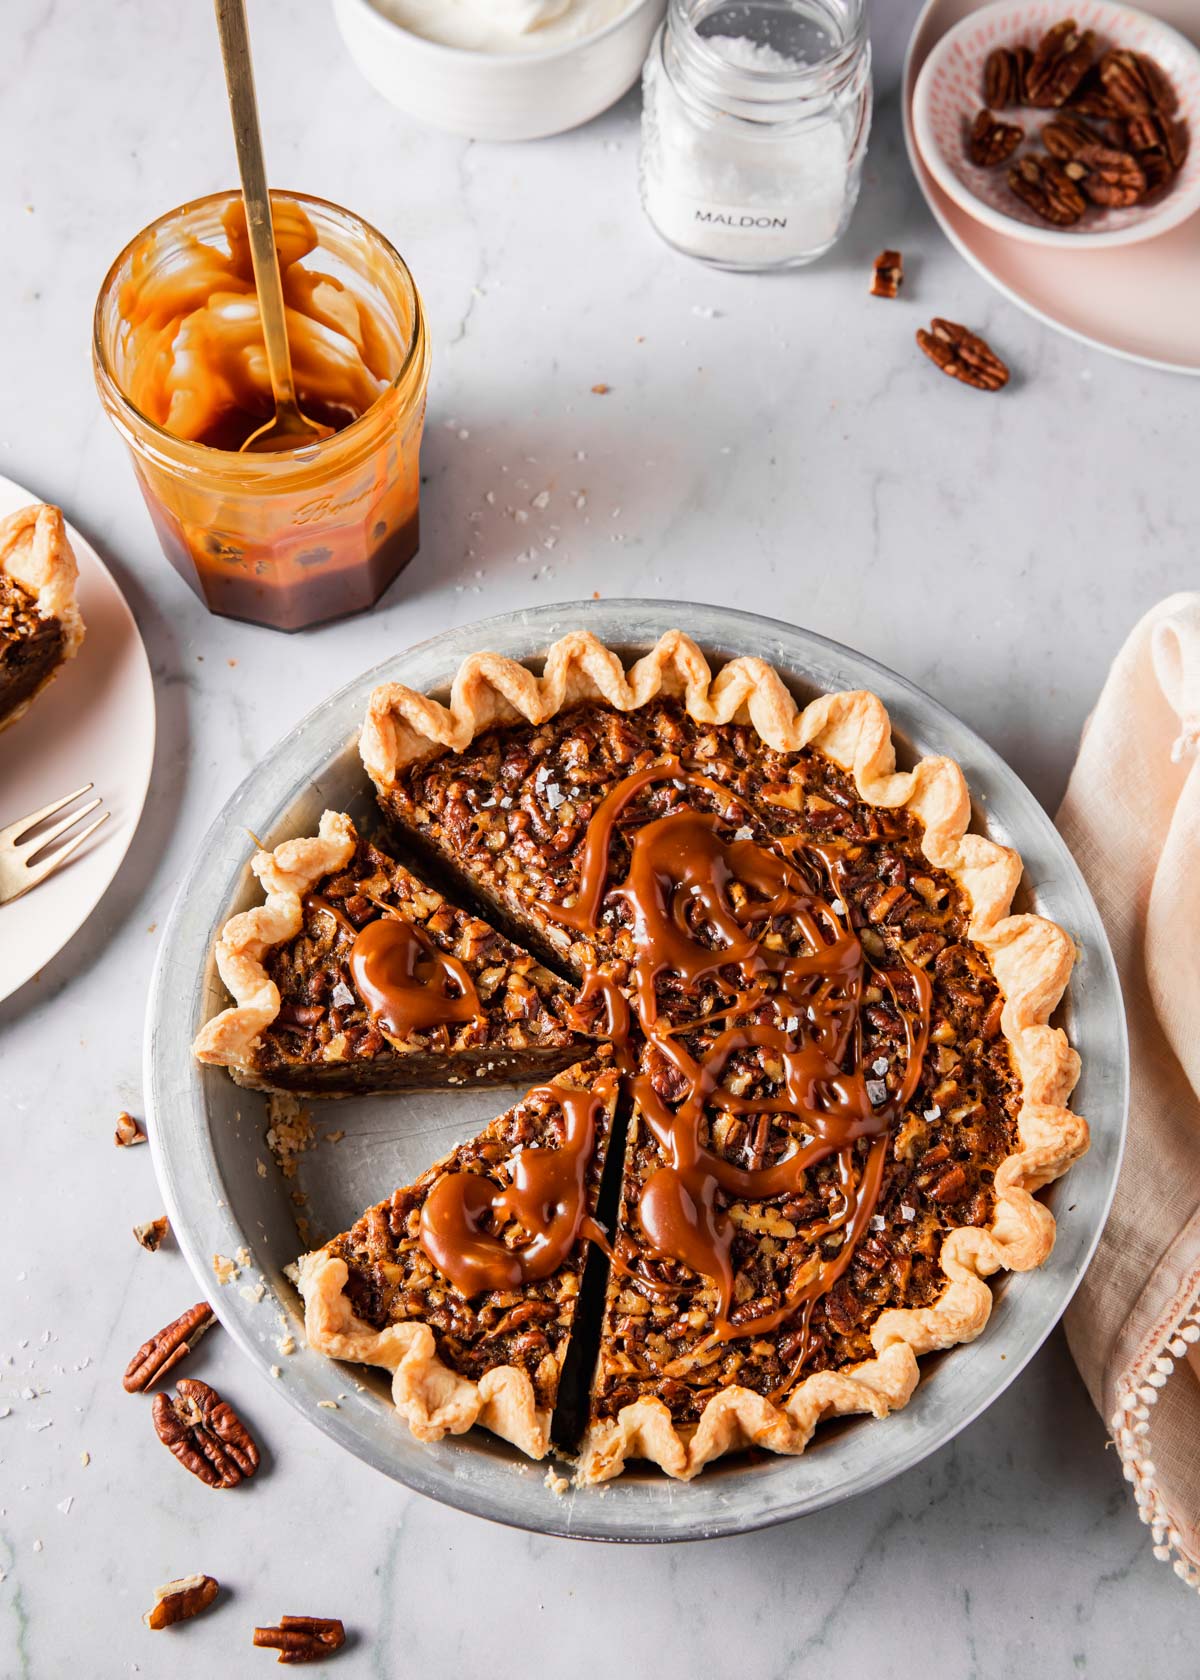 Pecan pie with salted caramel on top.